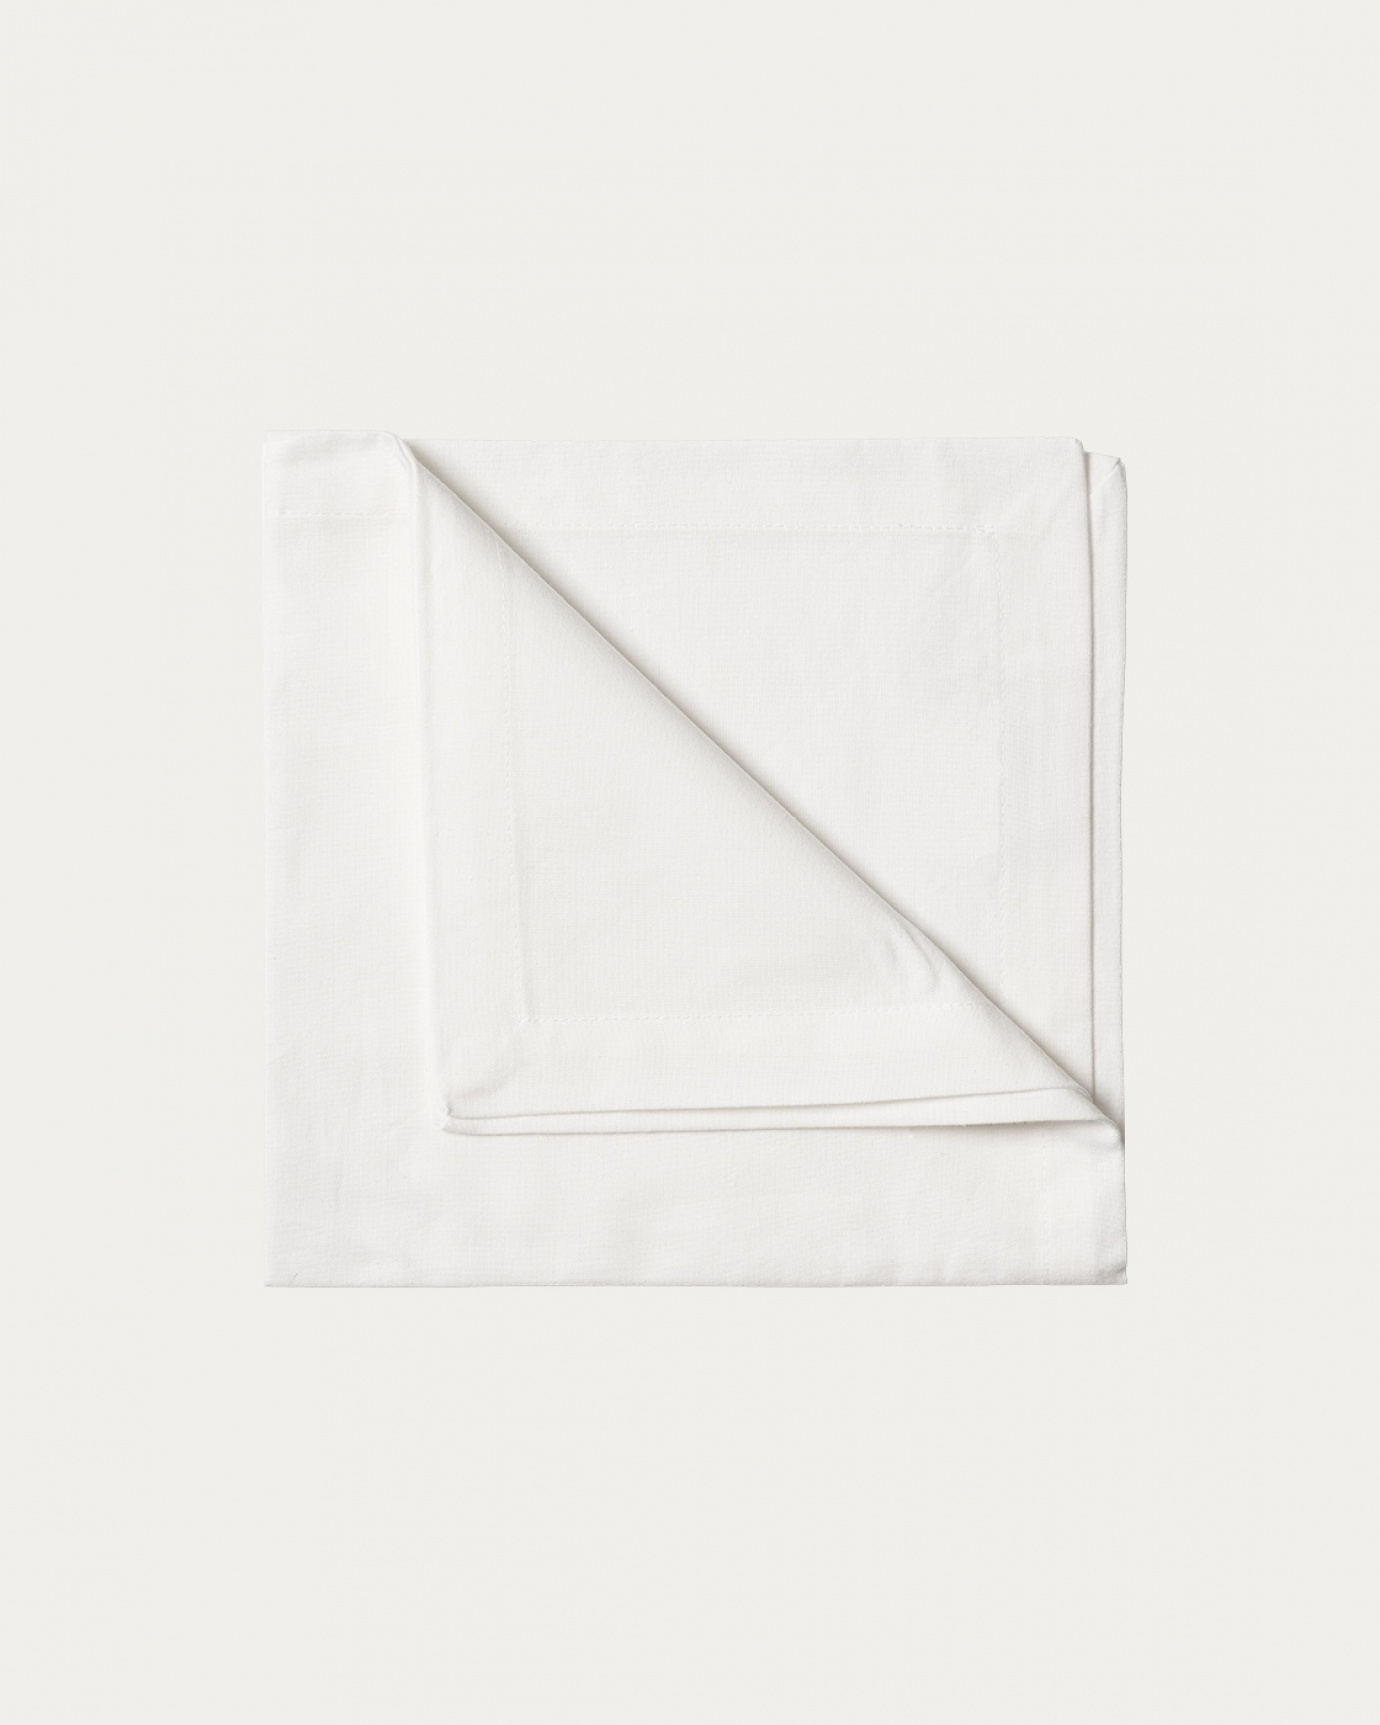 Product image white ROBERT napkin made of soft cotton from LINUM DESIGN. Size 45x45 cm and sold in 4-pack.